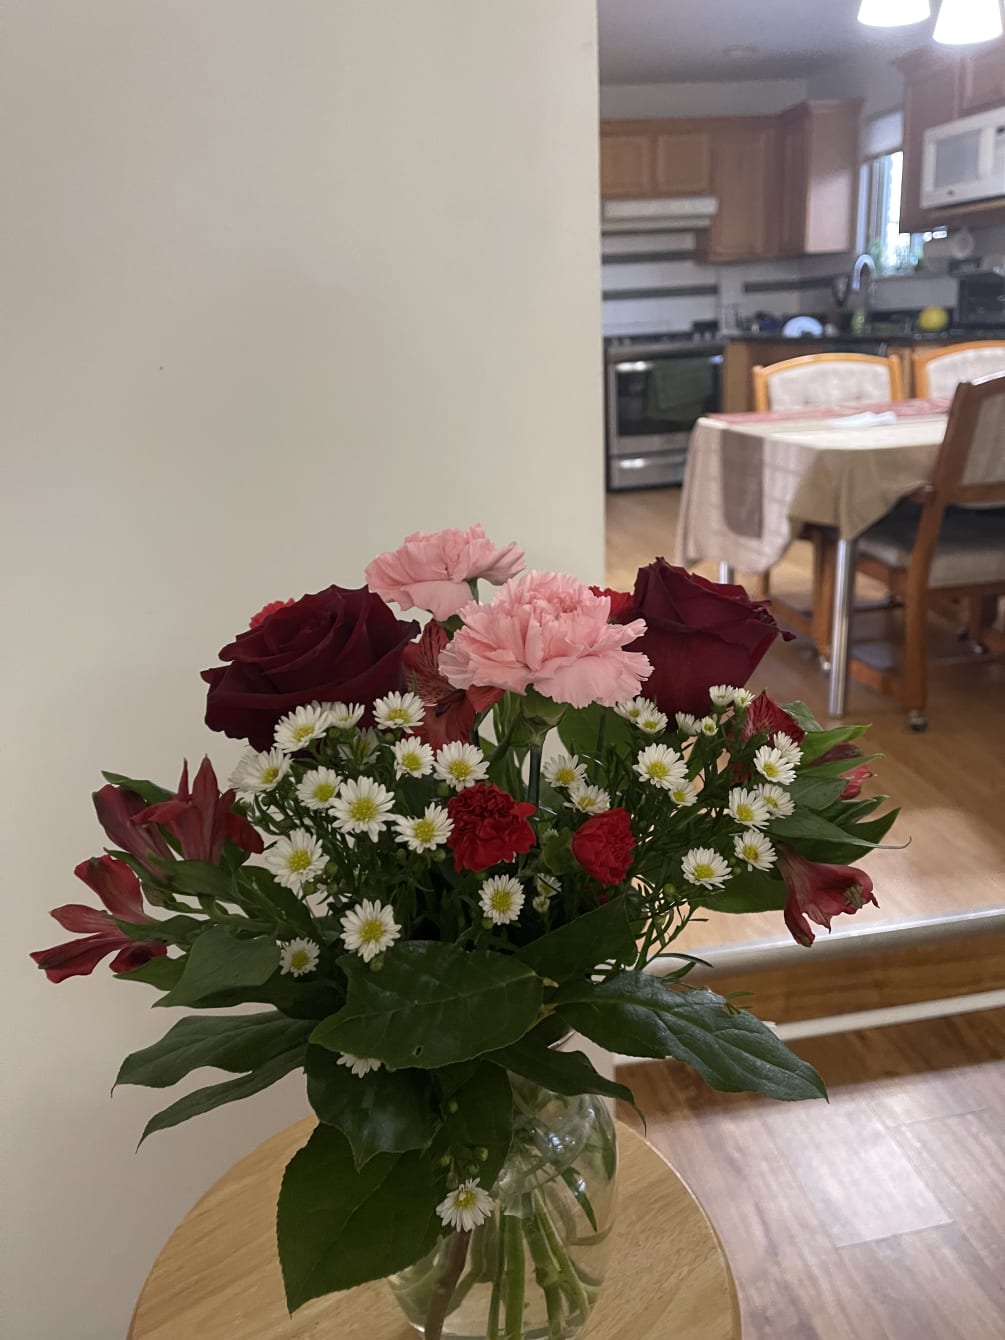 This beautiful arrangement will bring smile to a beautiful Lady. It will